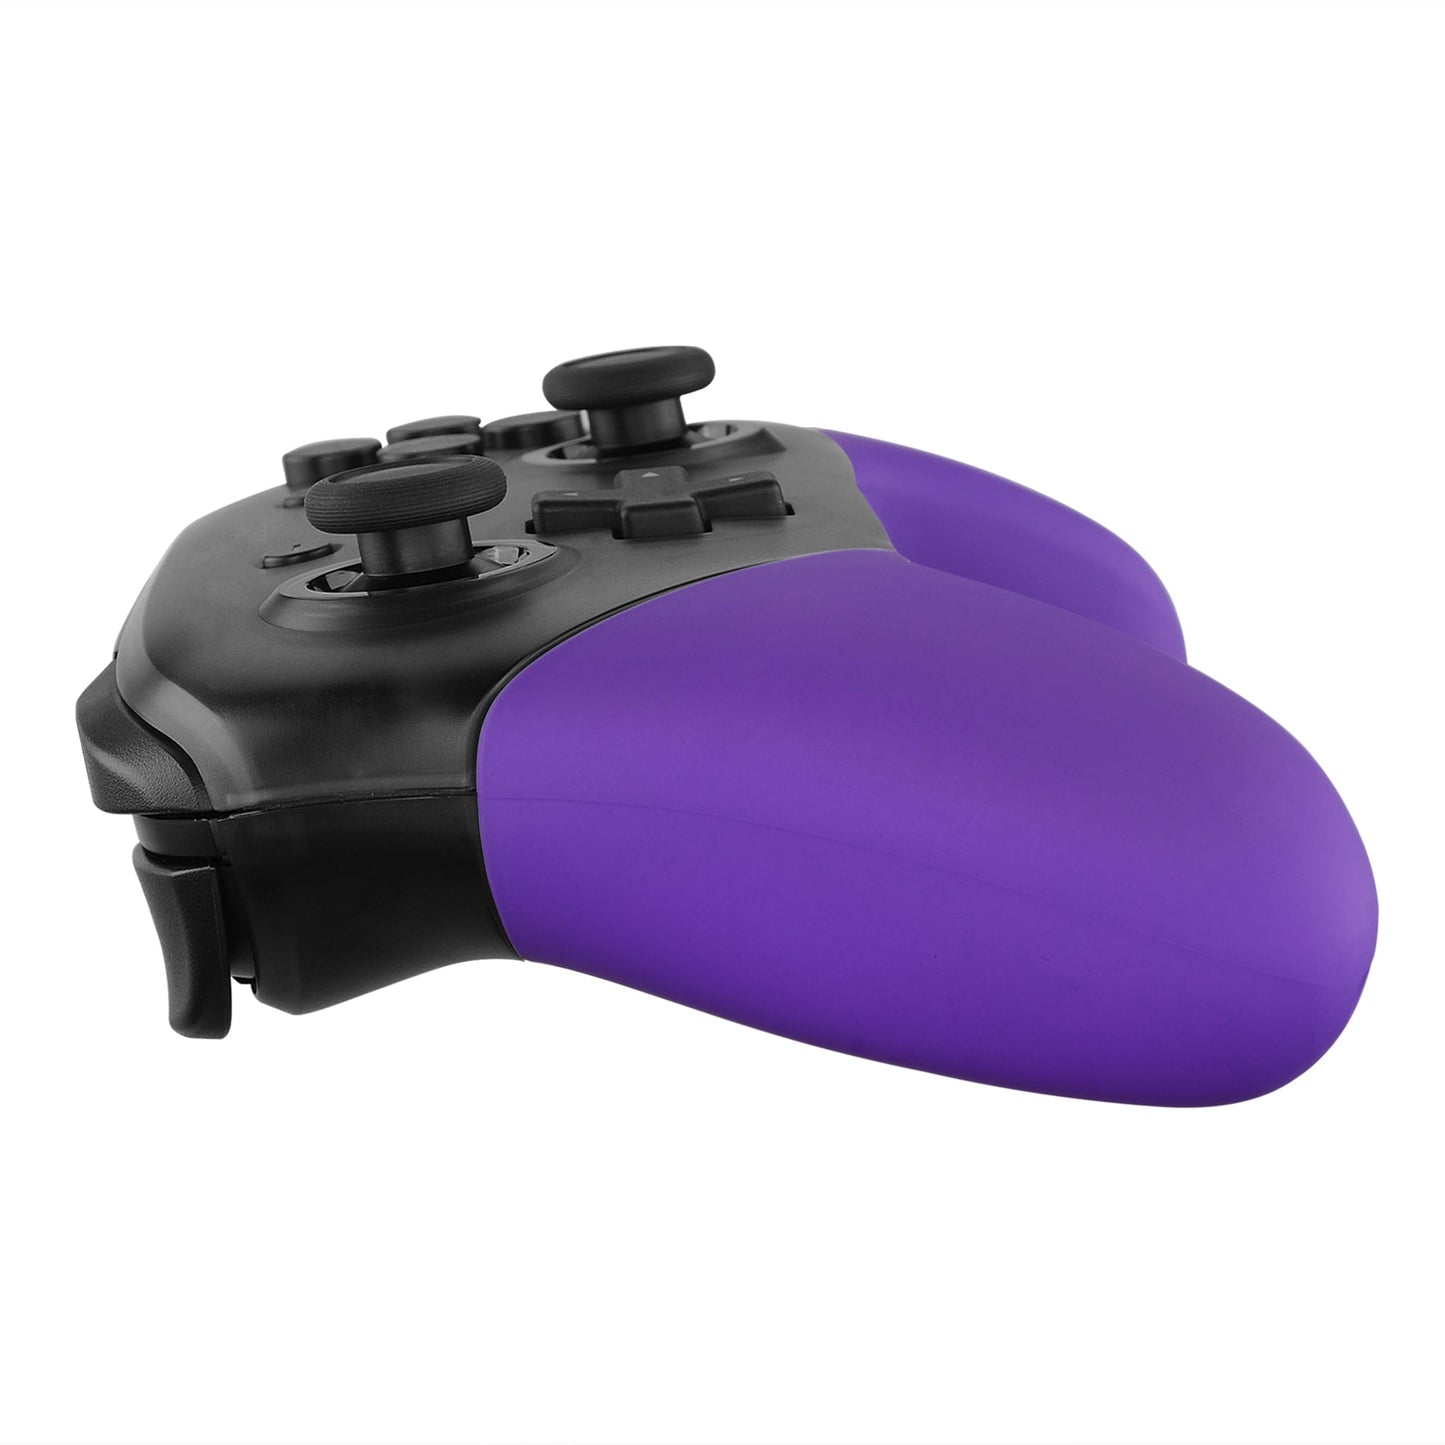 eXtremeRate Retail Purple Replacement Handle Grips for Nintendo Switch Pro Controller, Soft Touch DIY Hand Grip Shell for Nintendo Switch Pro - Controller NOT Included - GRP305